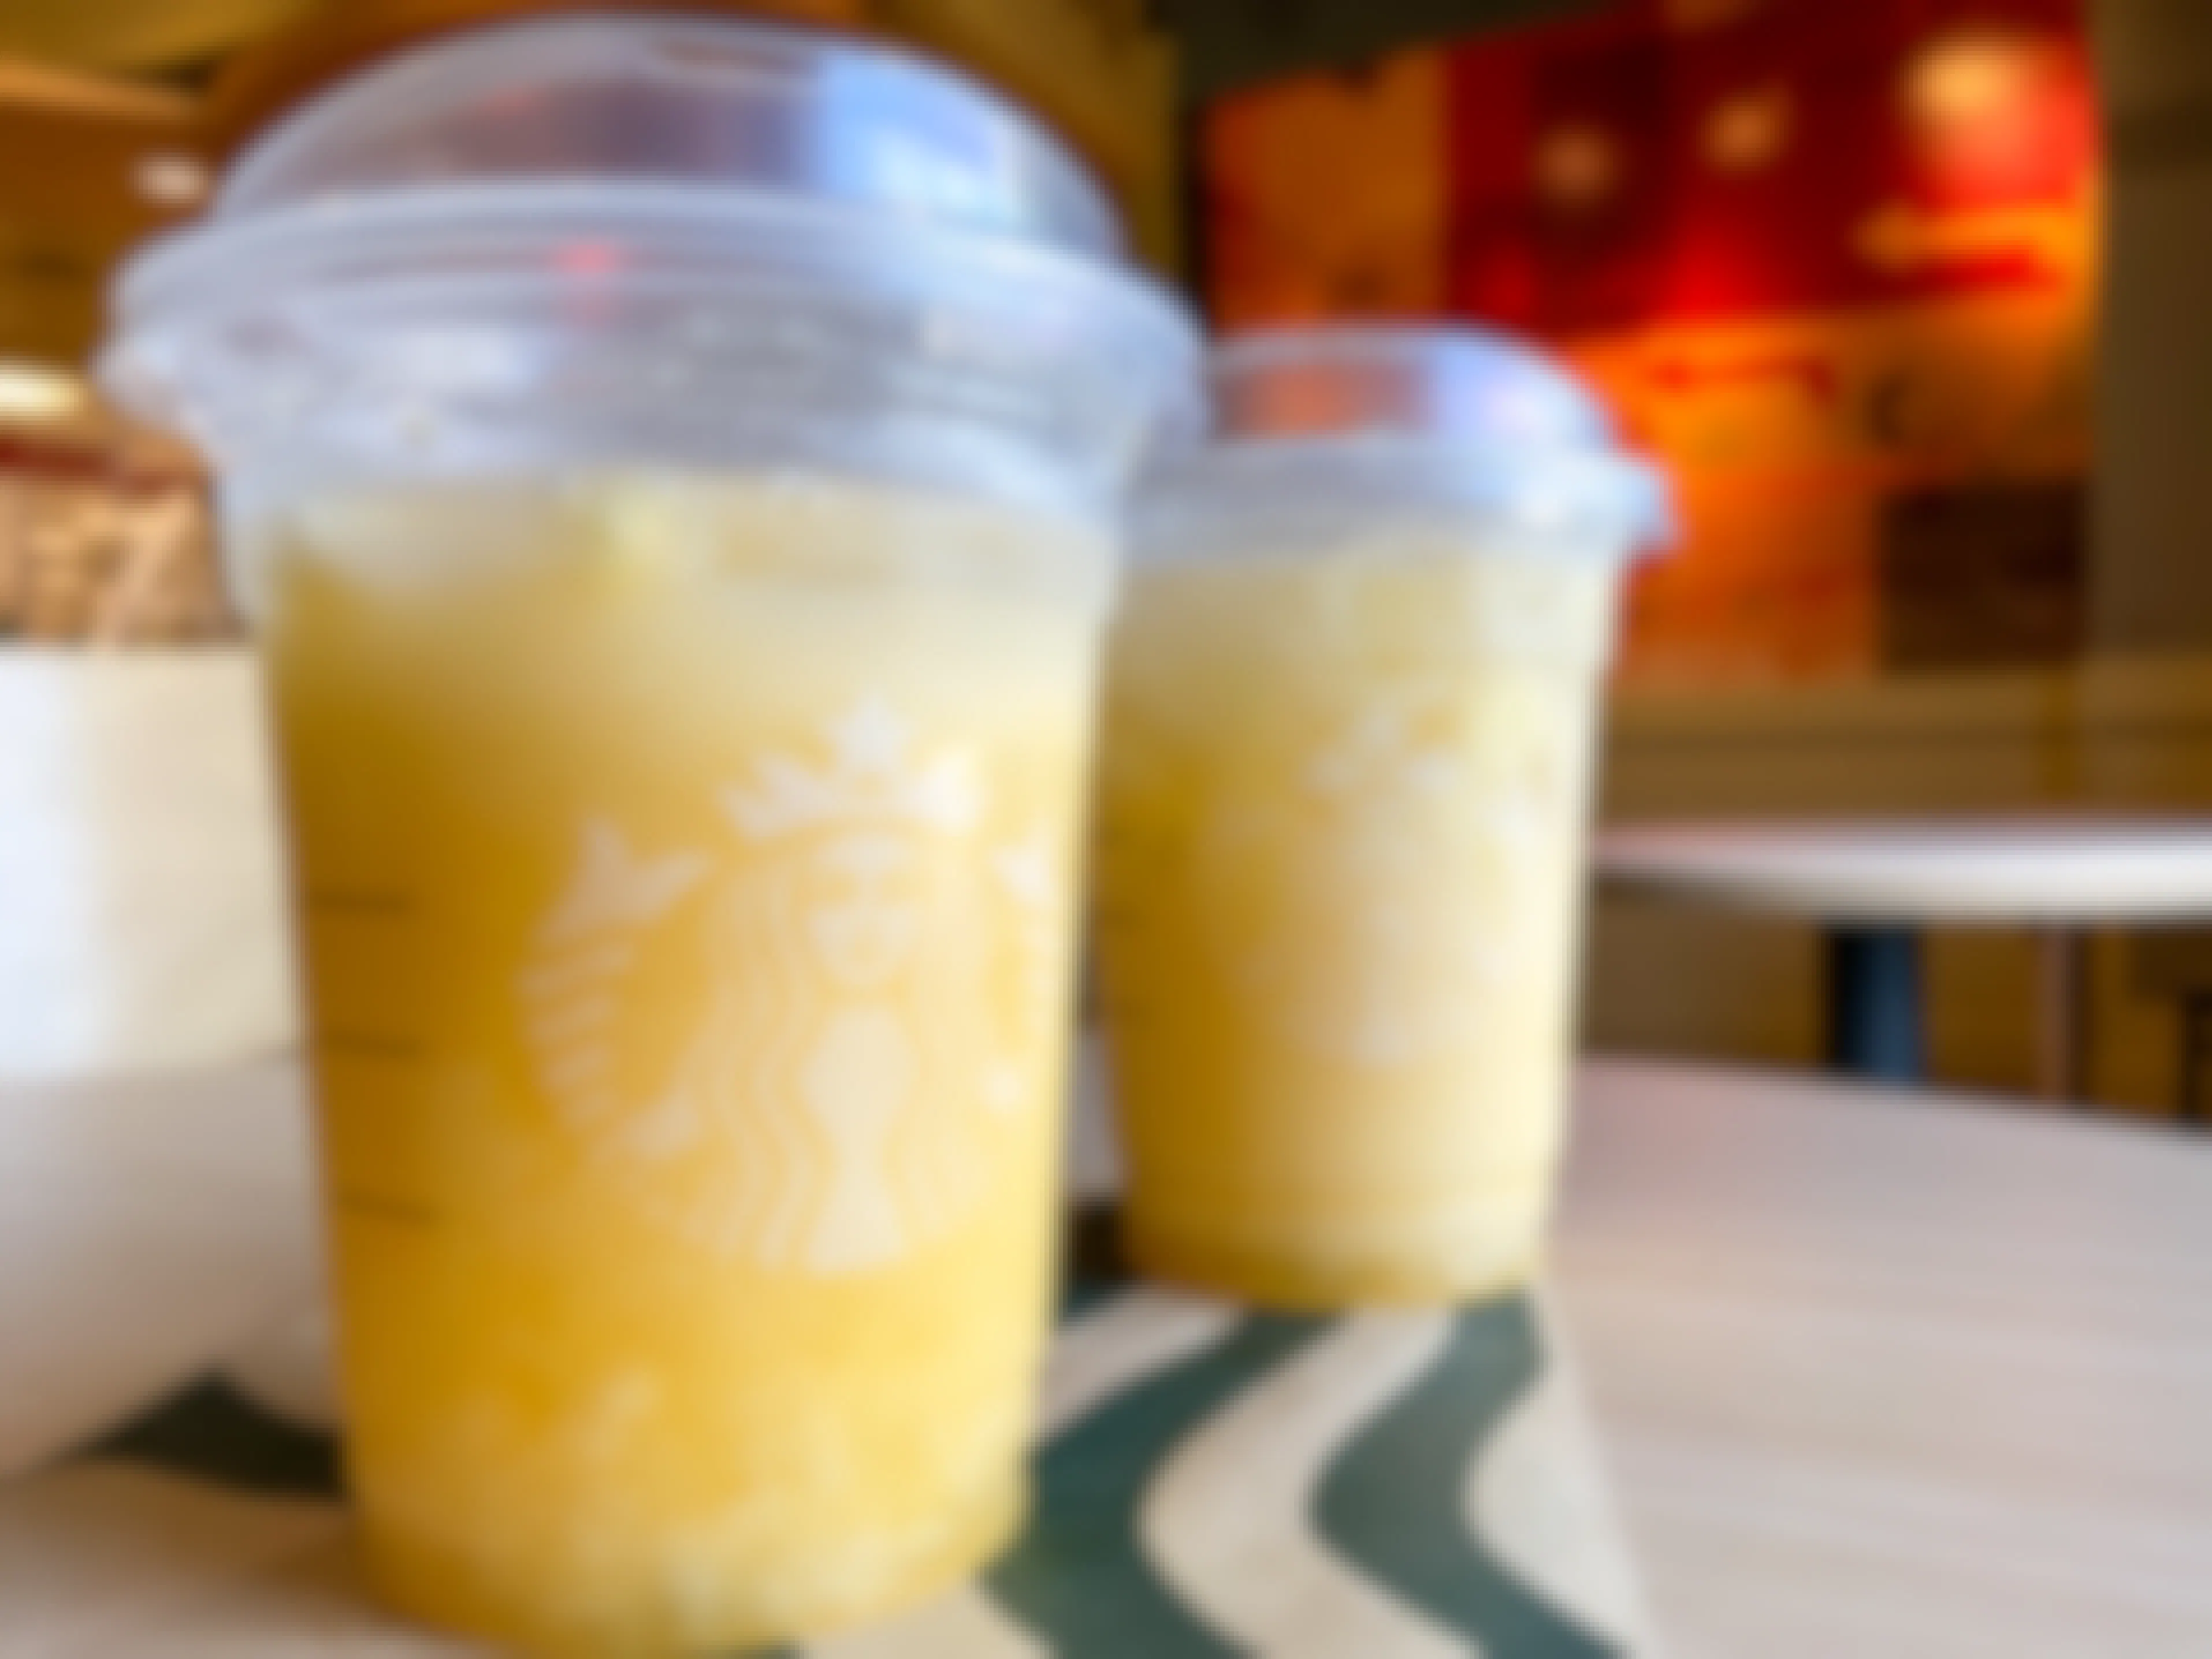 Starbucks Refreshers With 'No Water' Will Cost $1 More